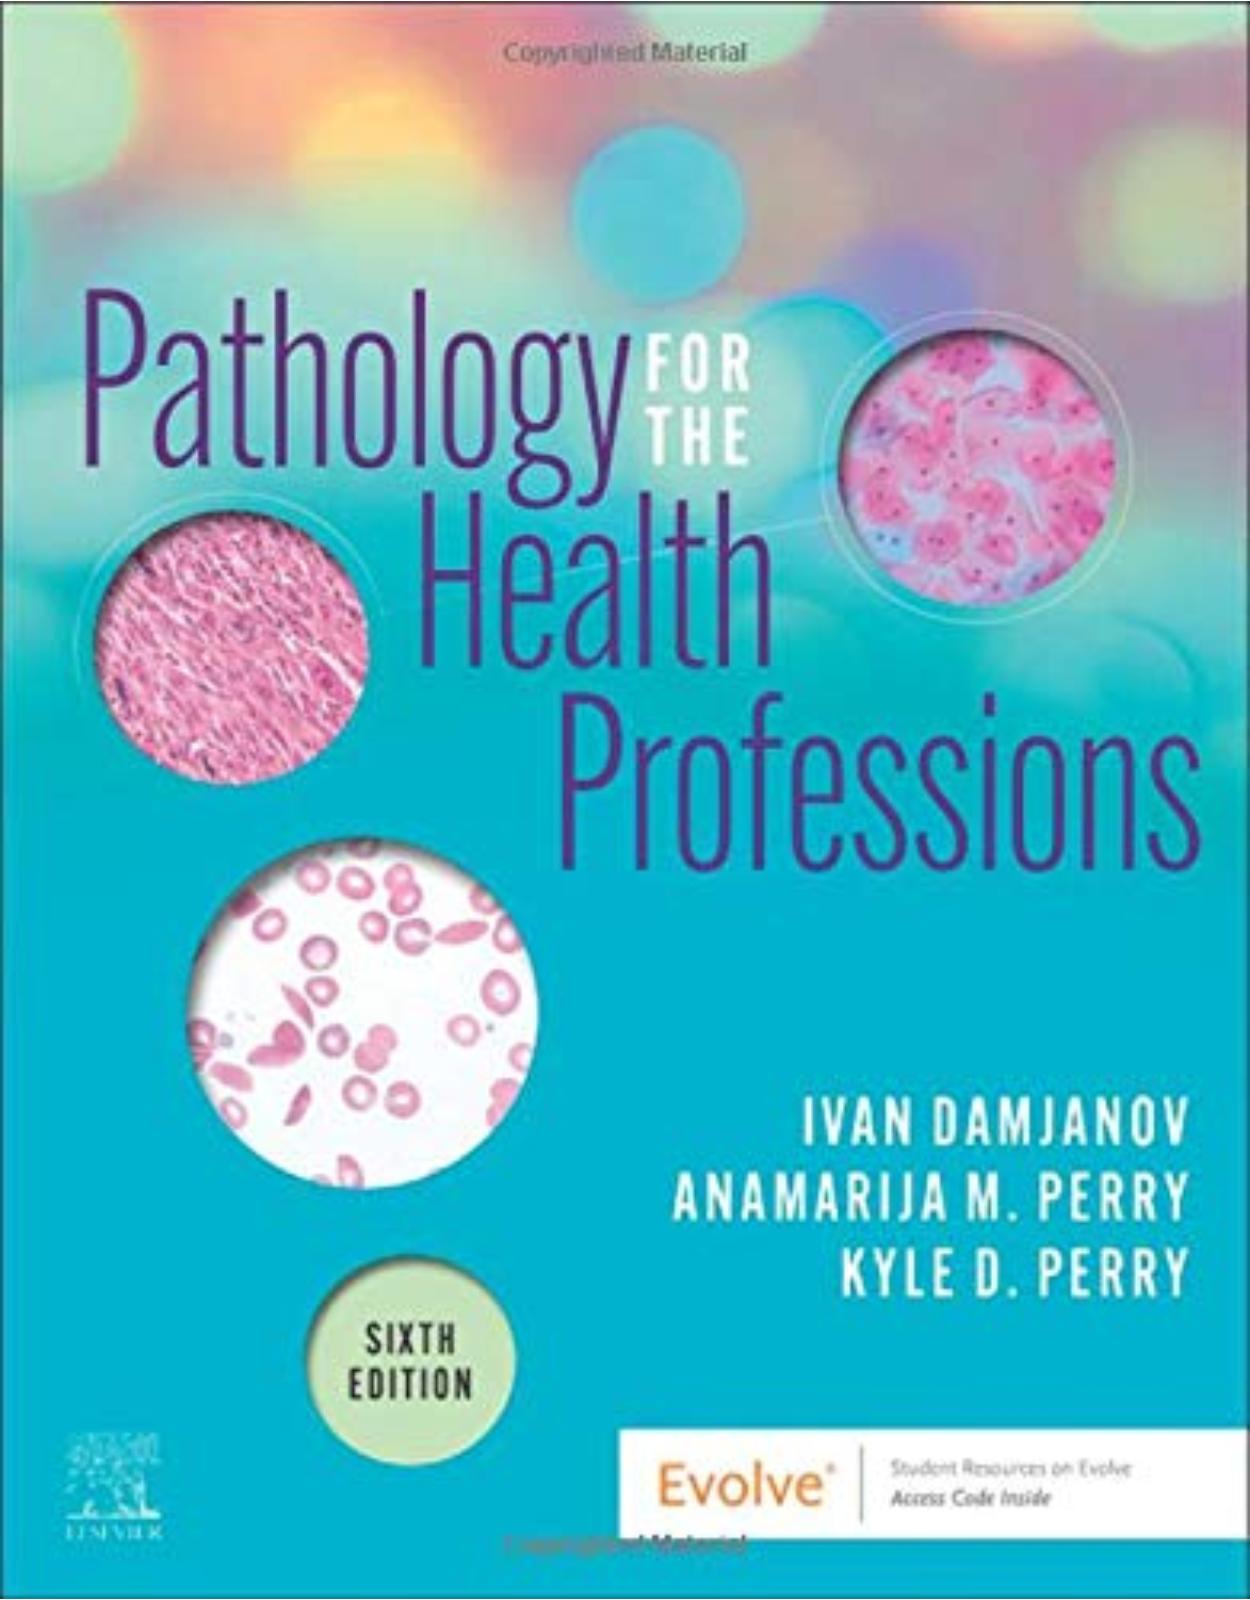 Pathology for the Health Professions 